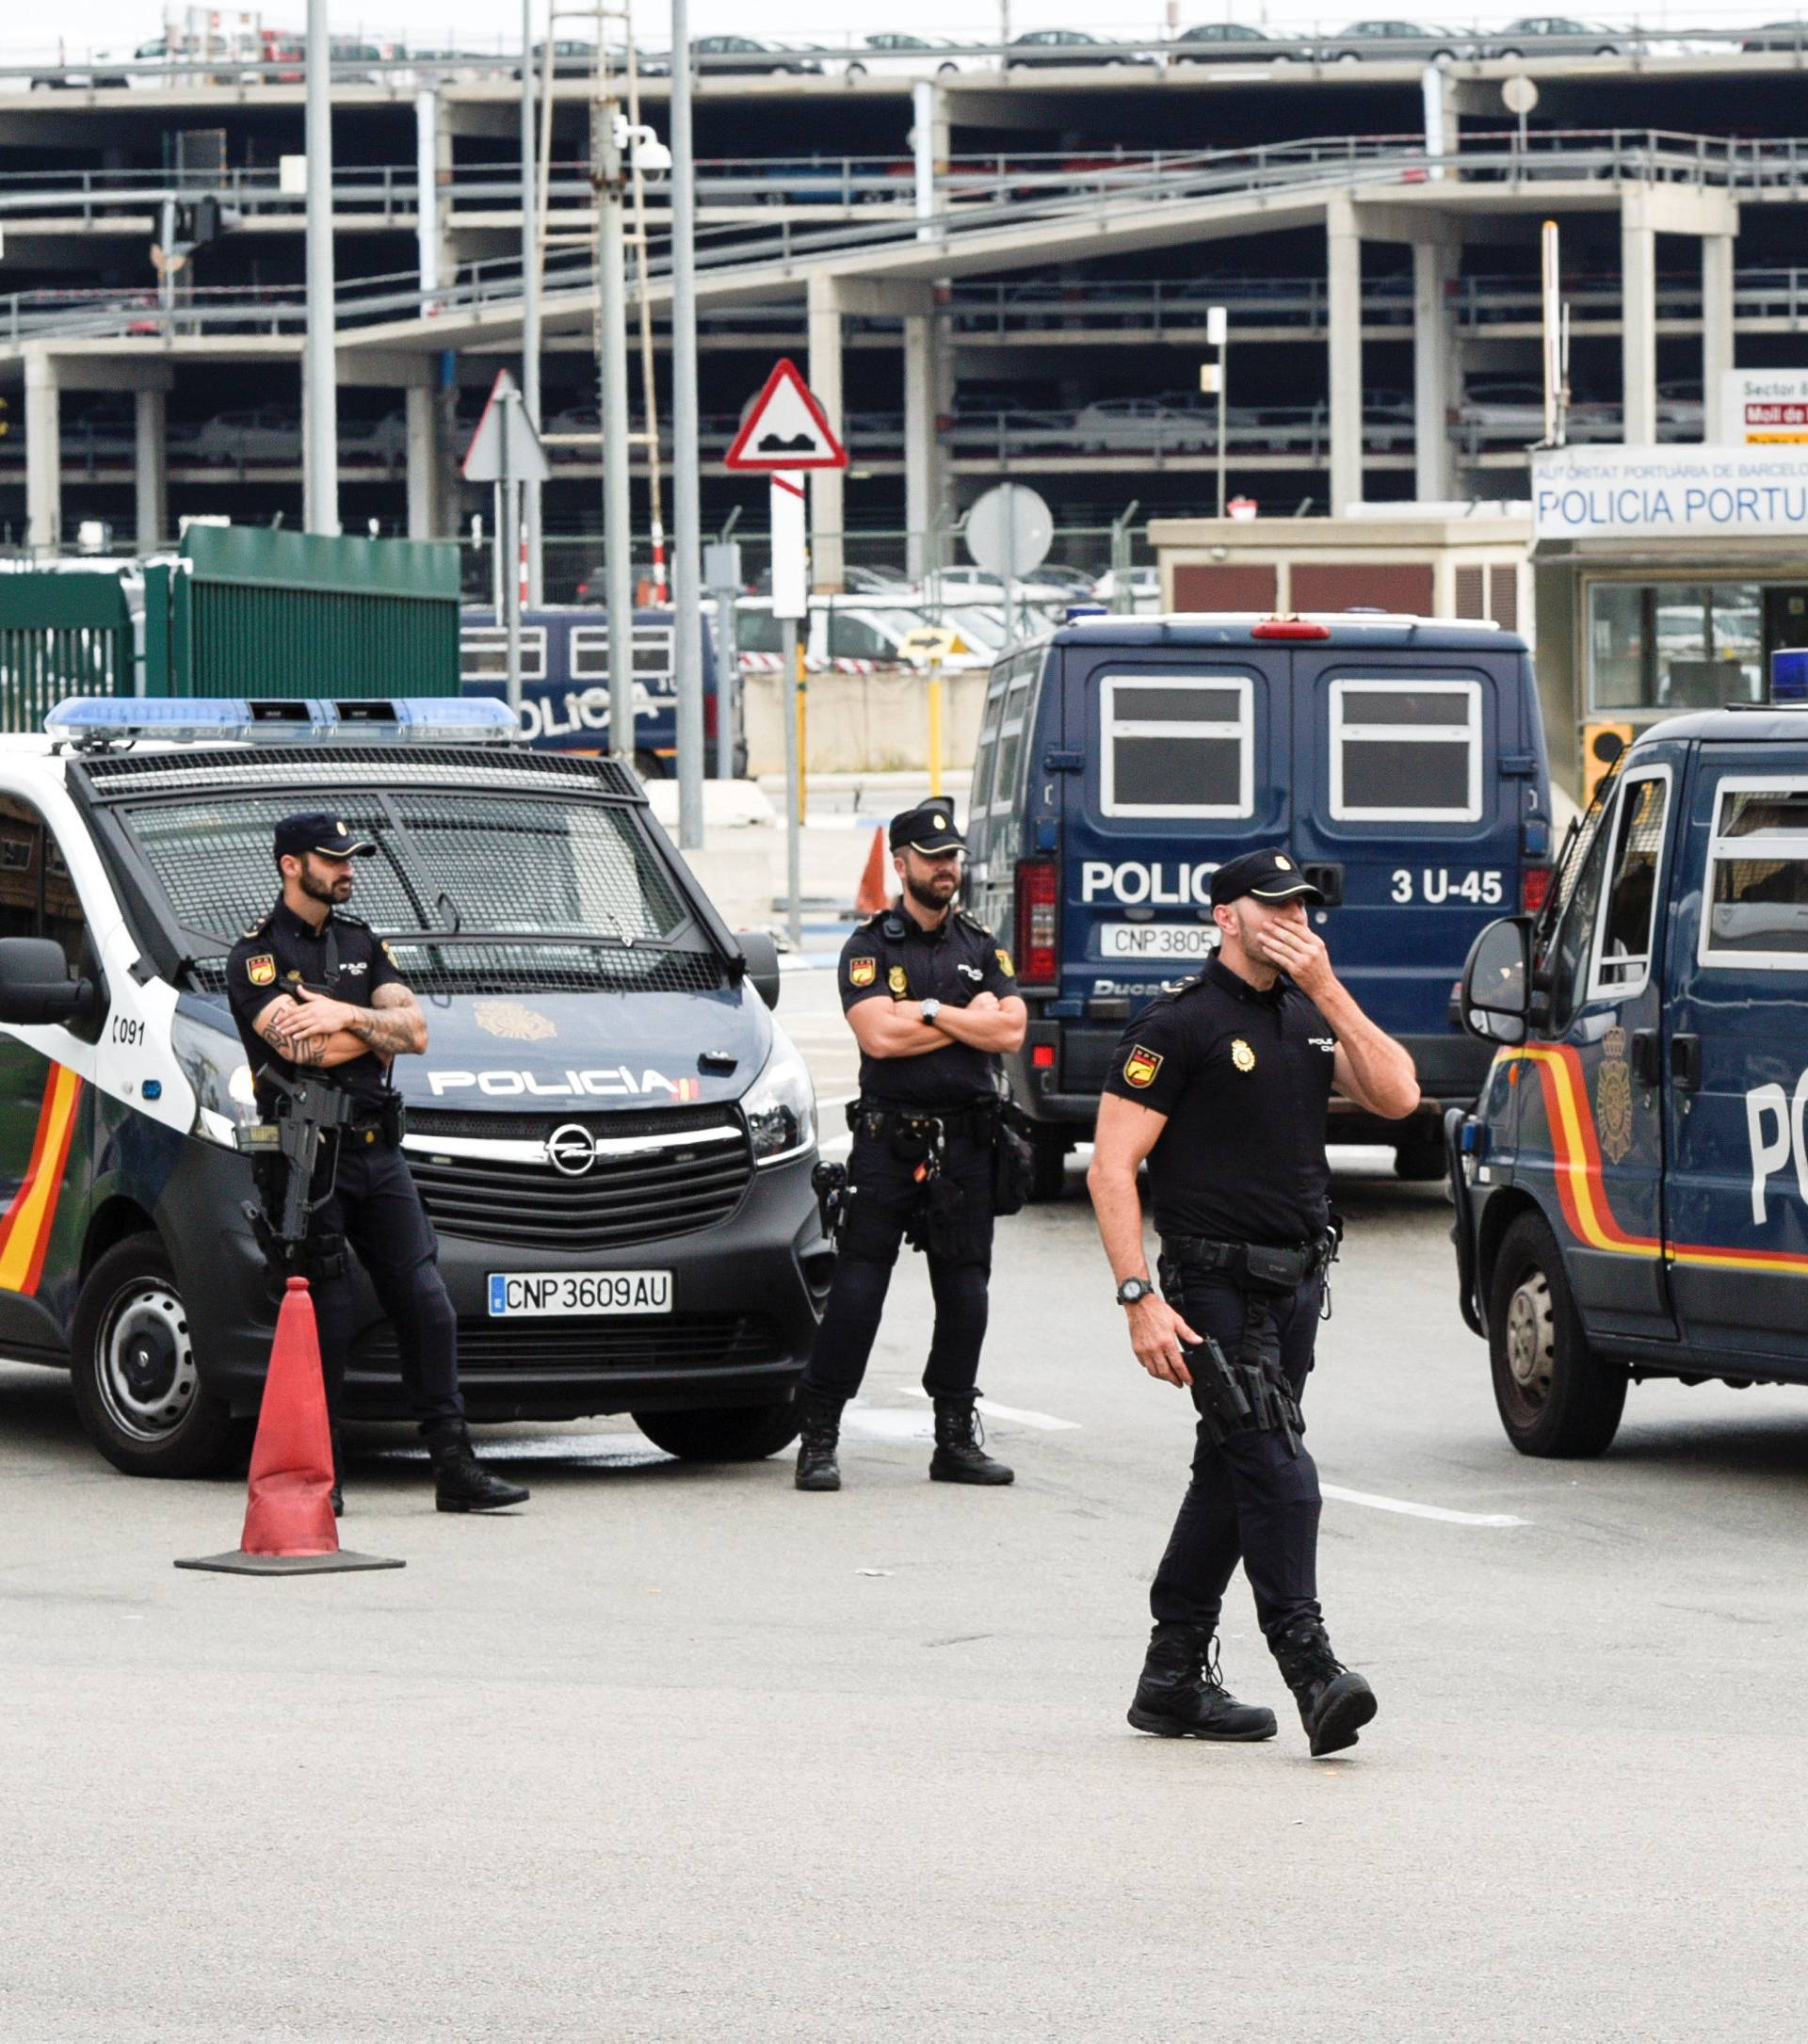 Spanish national police vehicles enter the port where hundreds of Spanish national police and civil guard reinforcements are housed in two ferries a day before the banned October 1 independence referendum, in Barcelona